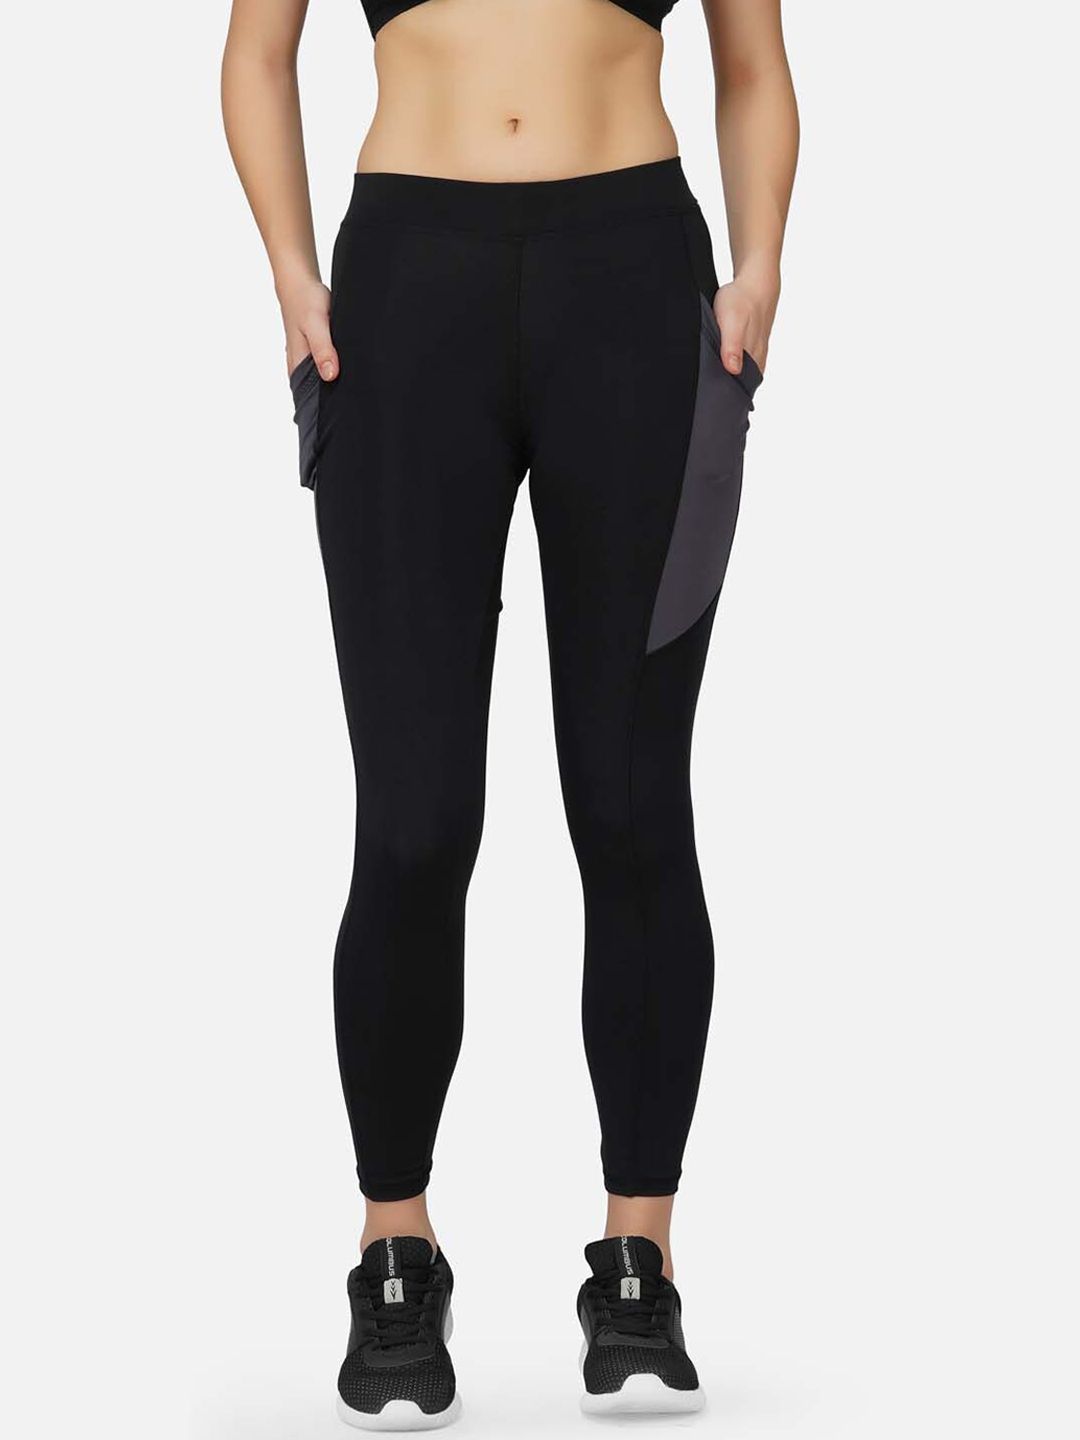 IMPERATIVE Women Black Solid Slim Fit Tights Price in India